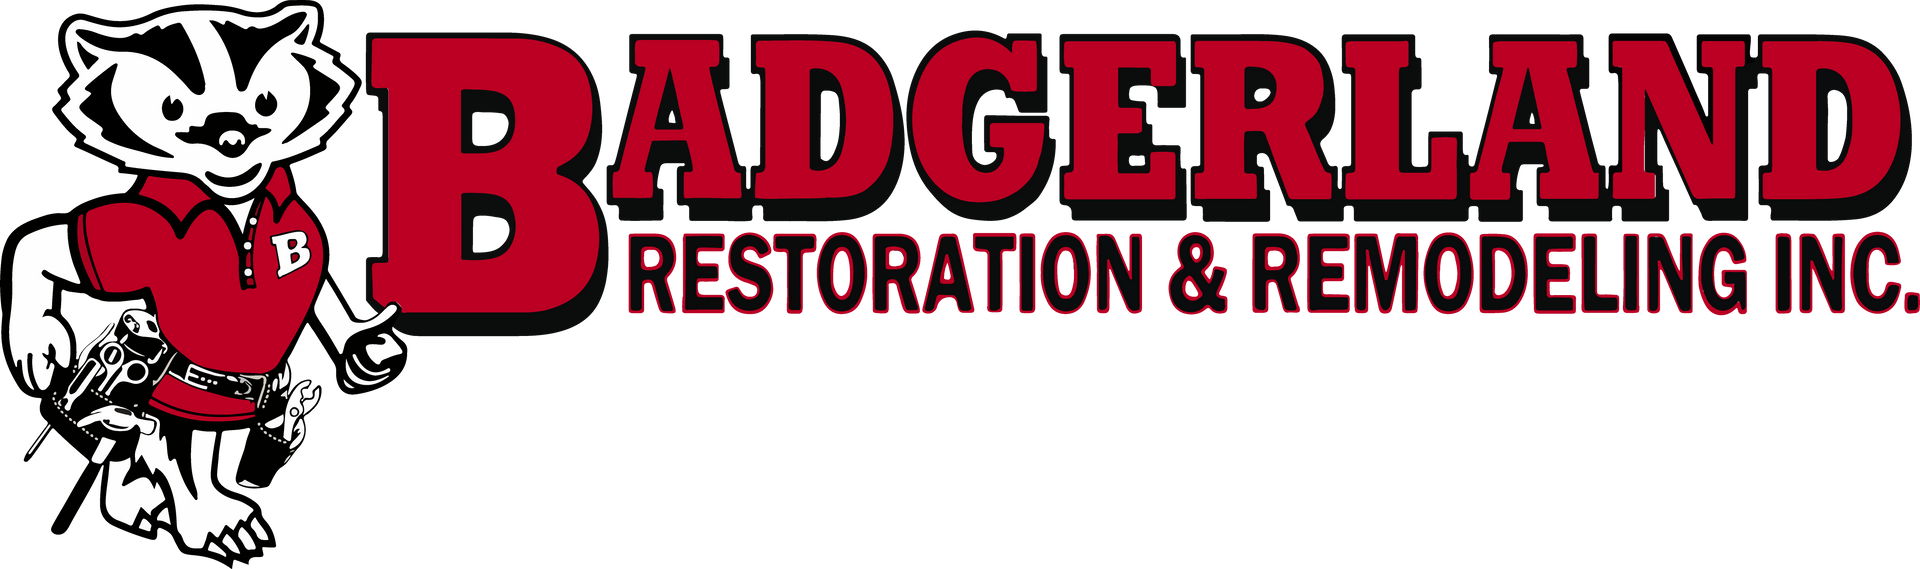 Hail Damage - Roofing Contractor Wisconsin - Window Installer - Siding Contractor Wisconsin - Home Insurance Claim - Window Replacement - Commercial Roofer - Badgerland Restoration & Remodeling - Waupaca Wisconsin - Stevens Point - Appleton